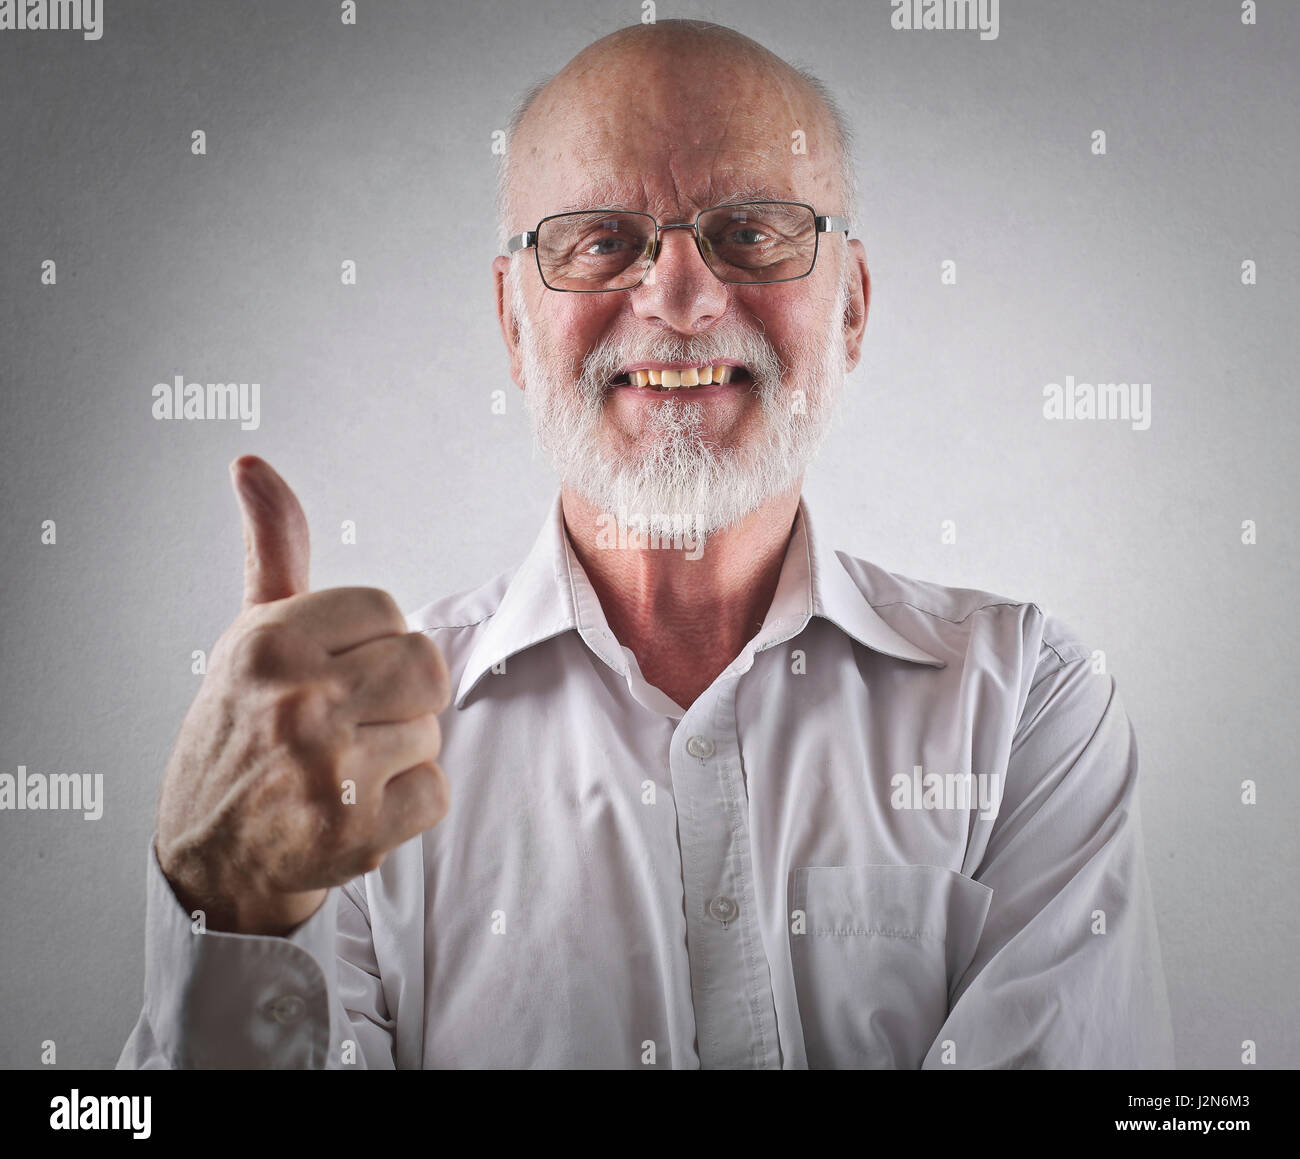 Old man showing like sign Stock Photo